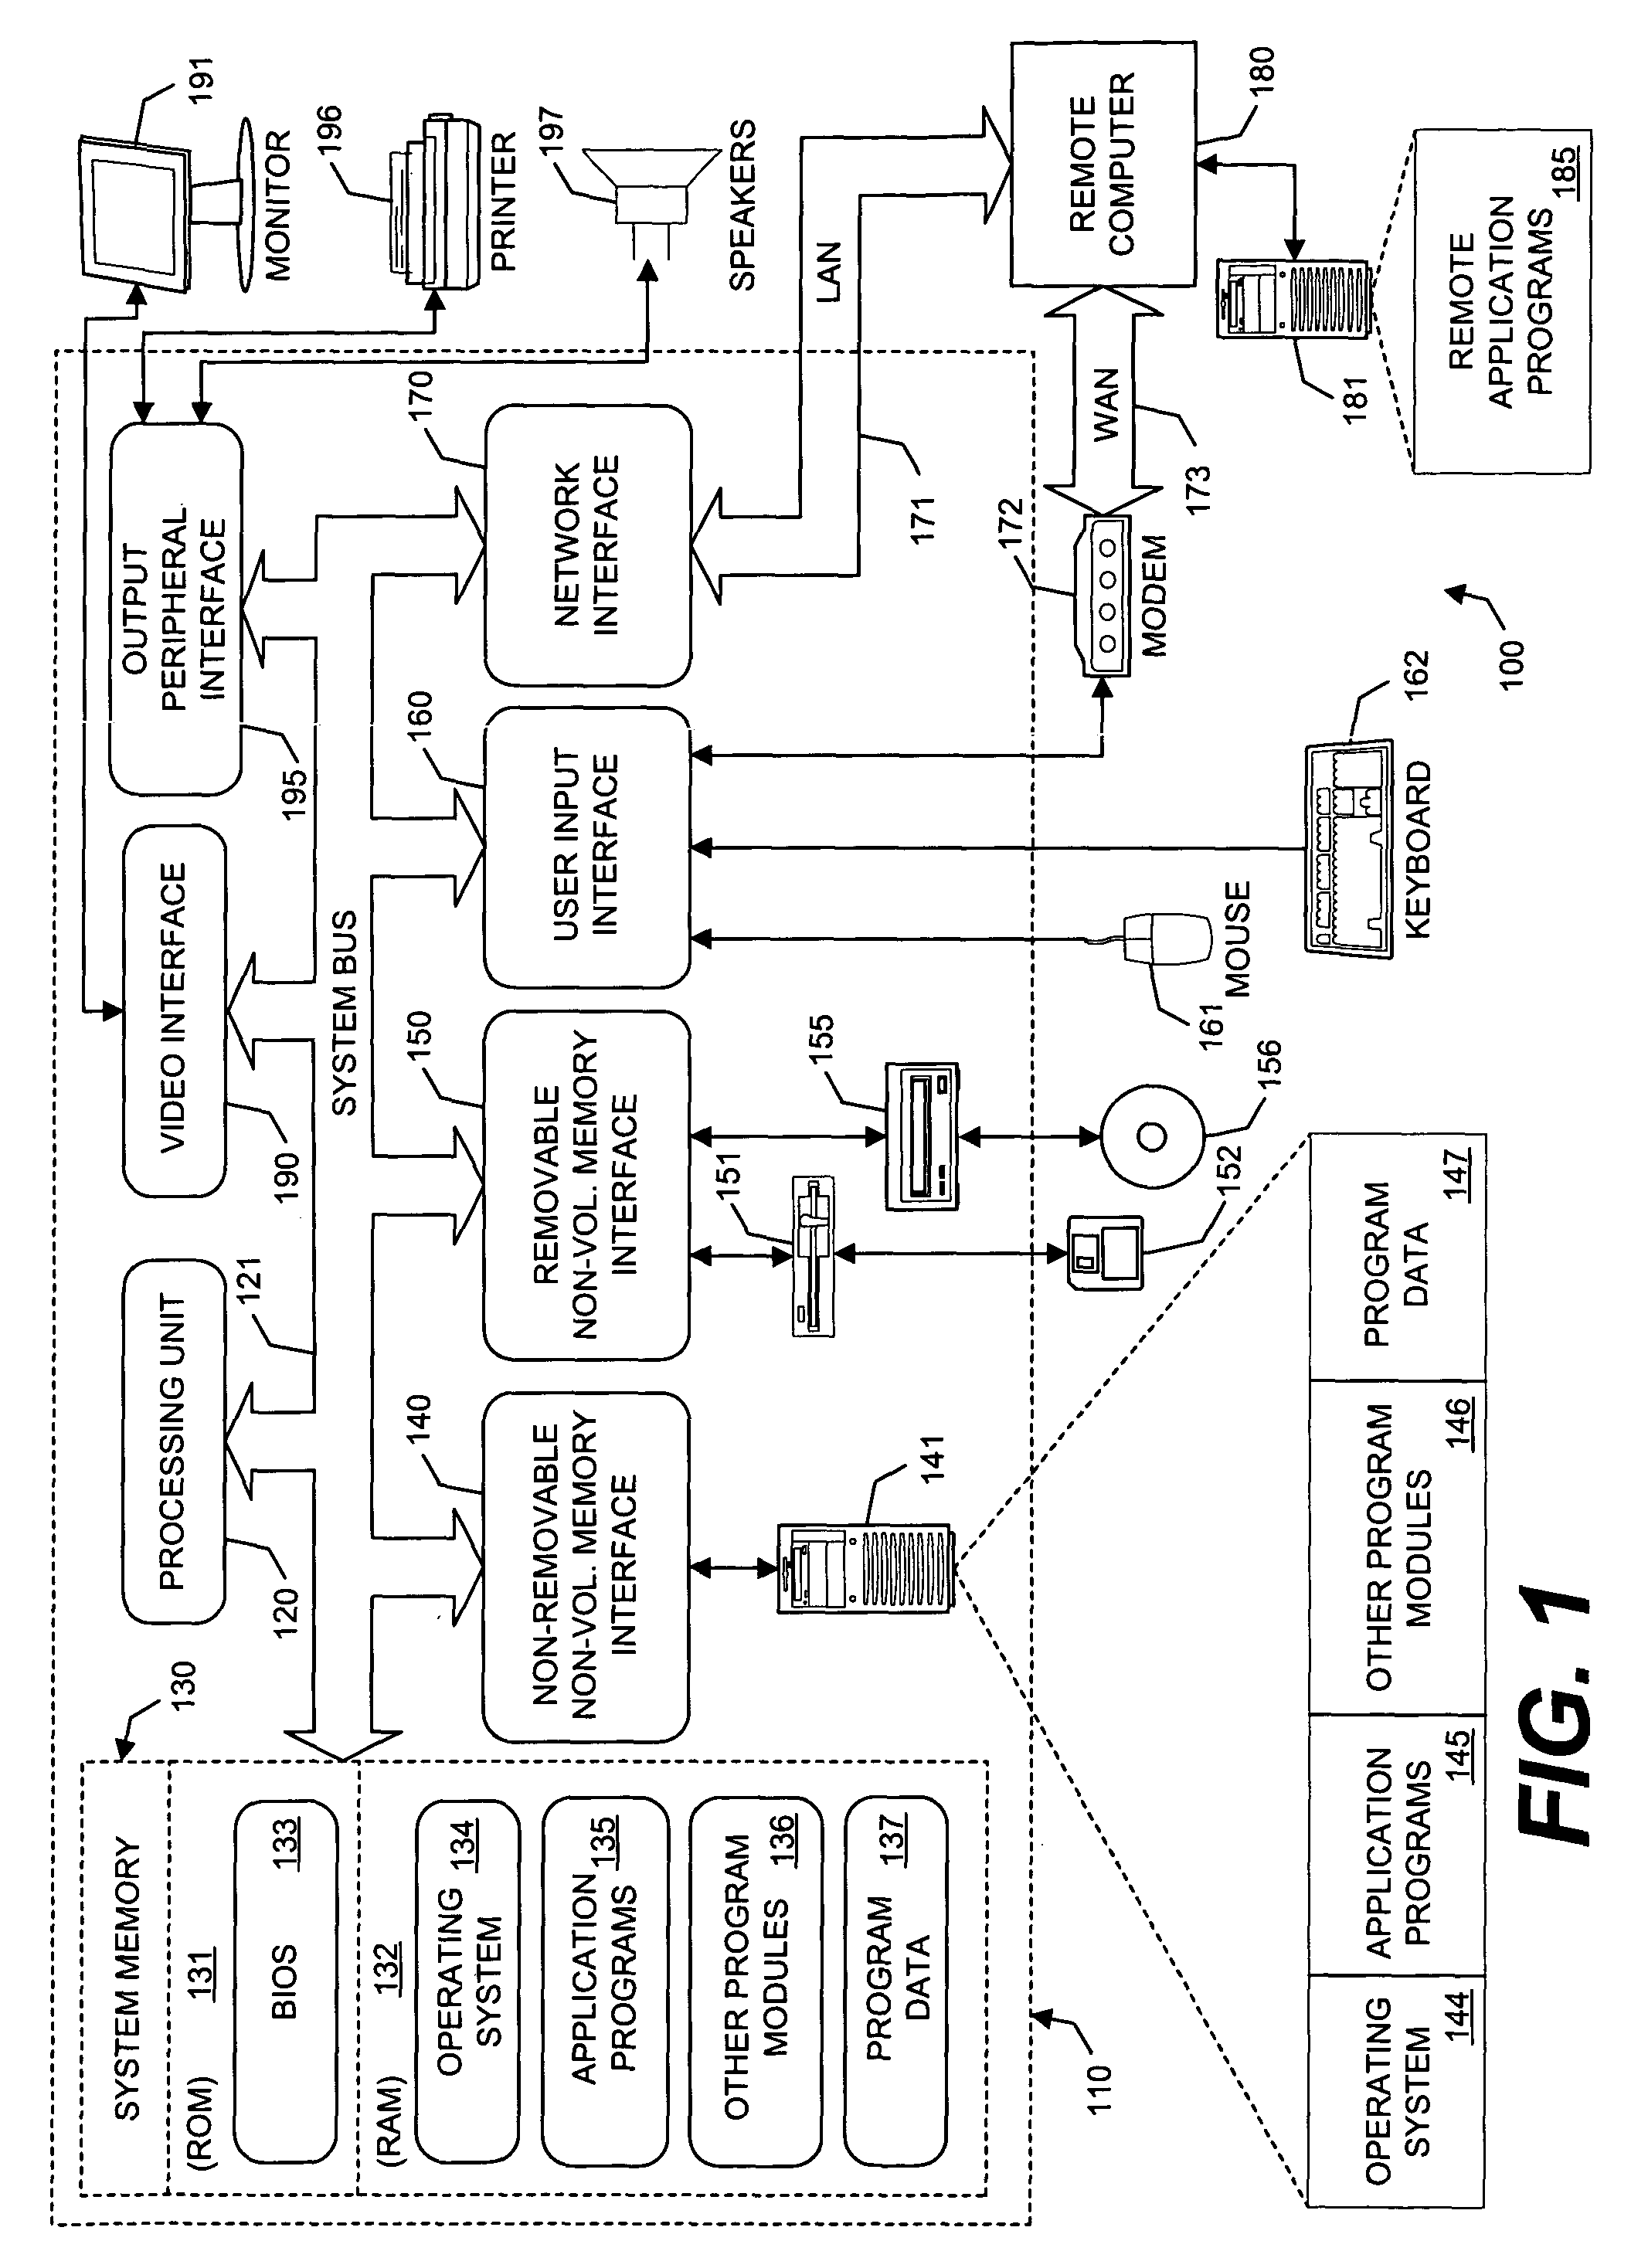 Method and system for dynamically capturing HTML elements